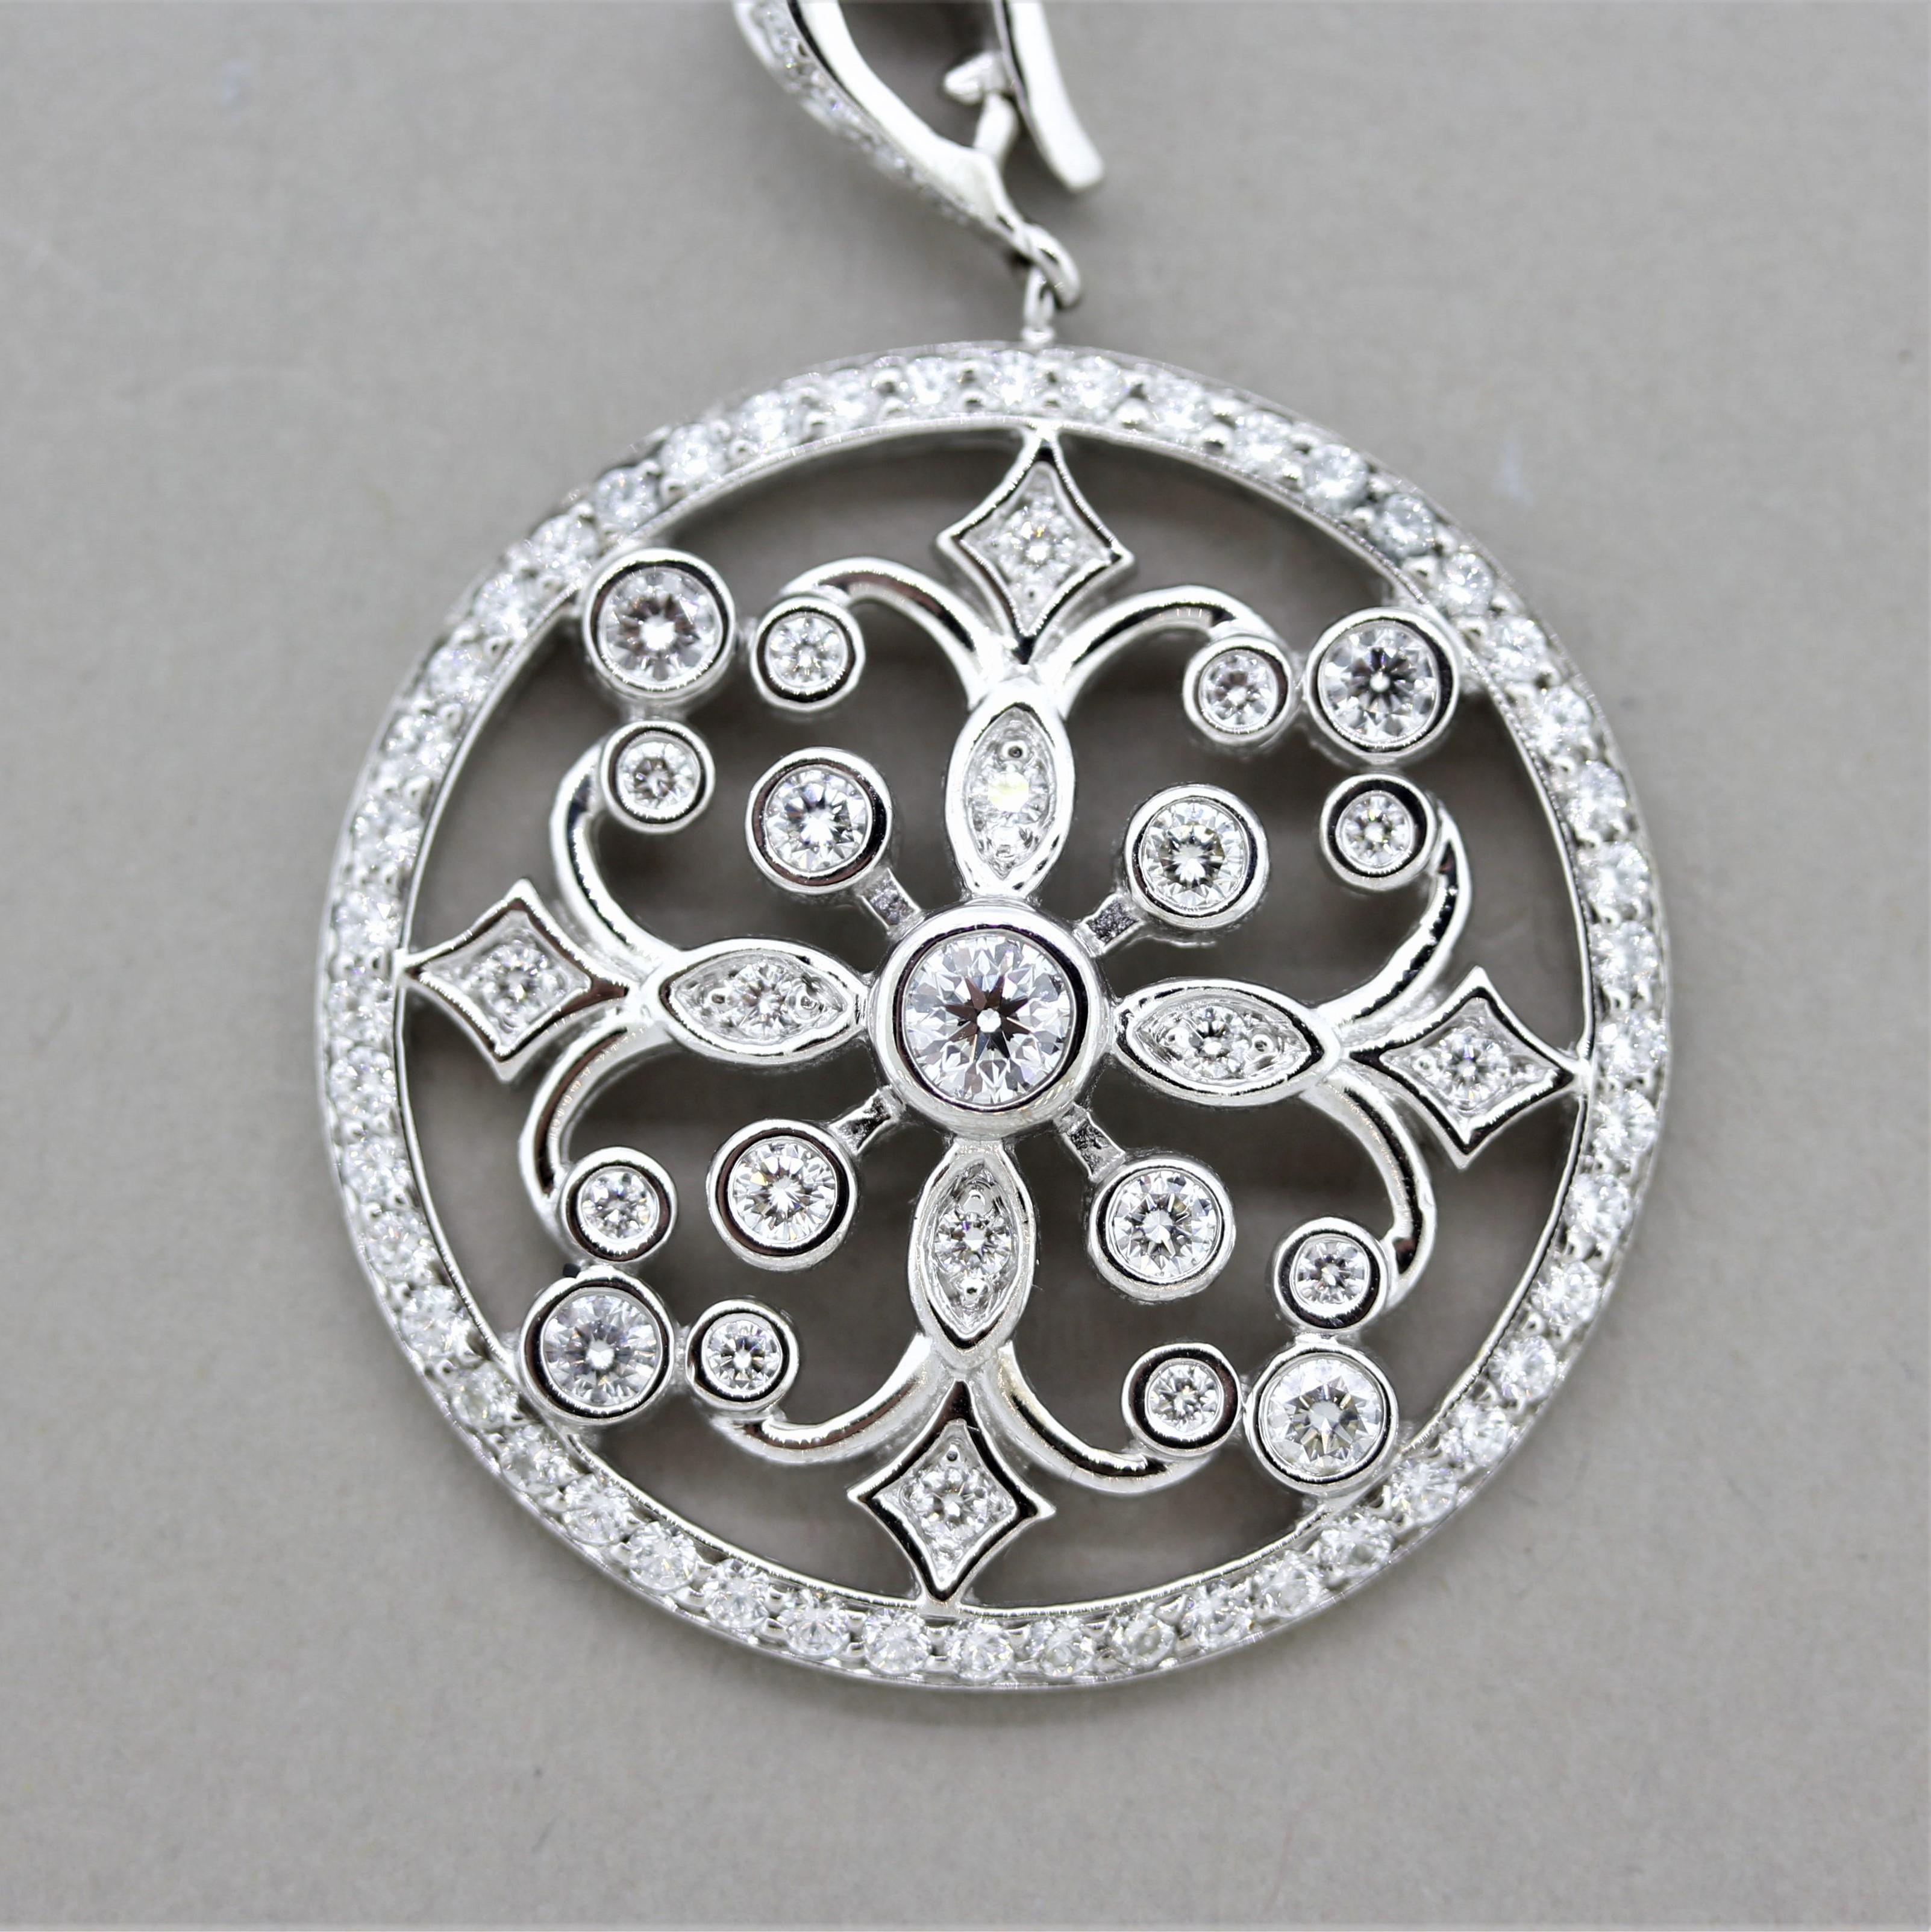 A lovely diamond pendant made in 18k white gold. It features a total of 2.16 carats of round brilliant-cut diamonds set around the pendant in stylish patterns. There are smaller rounds set on the border of the medallion while larger stones are set